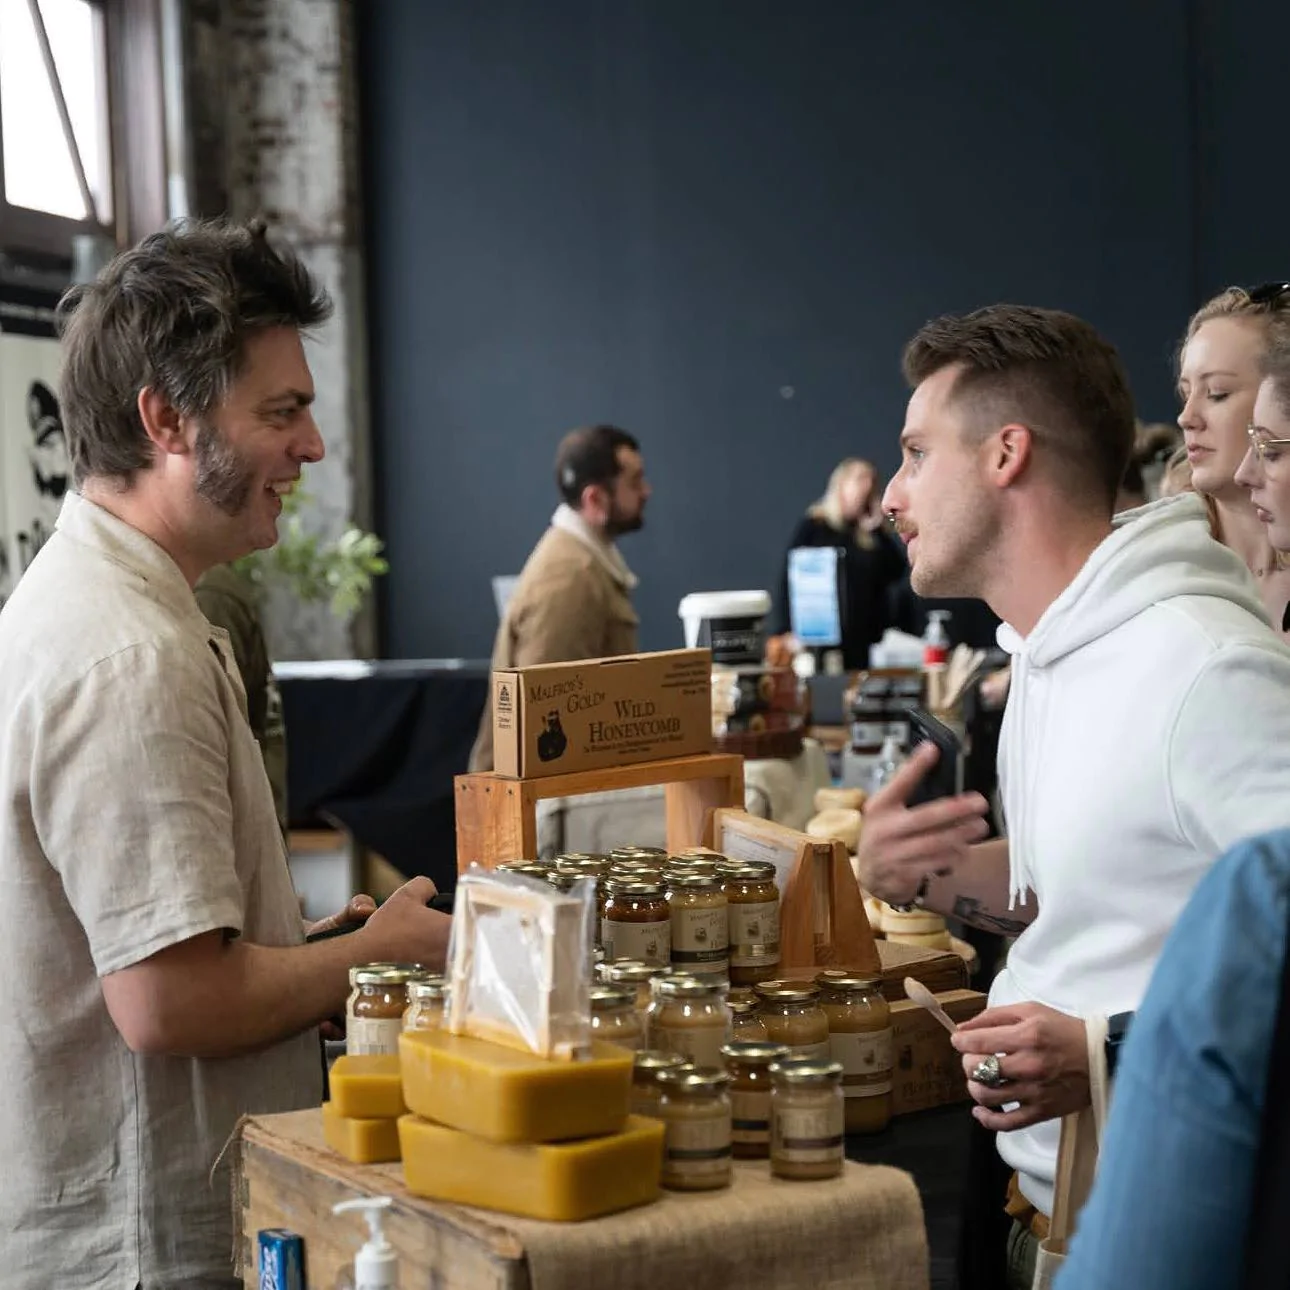 Malfroy's Gold at Two Providores event